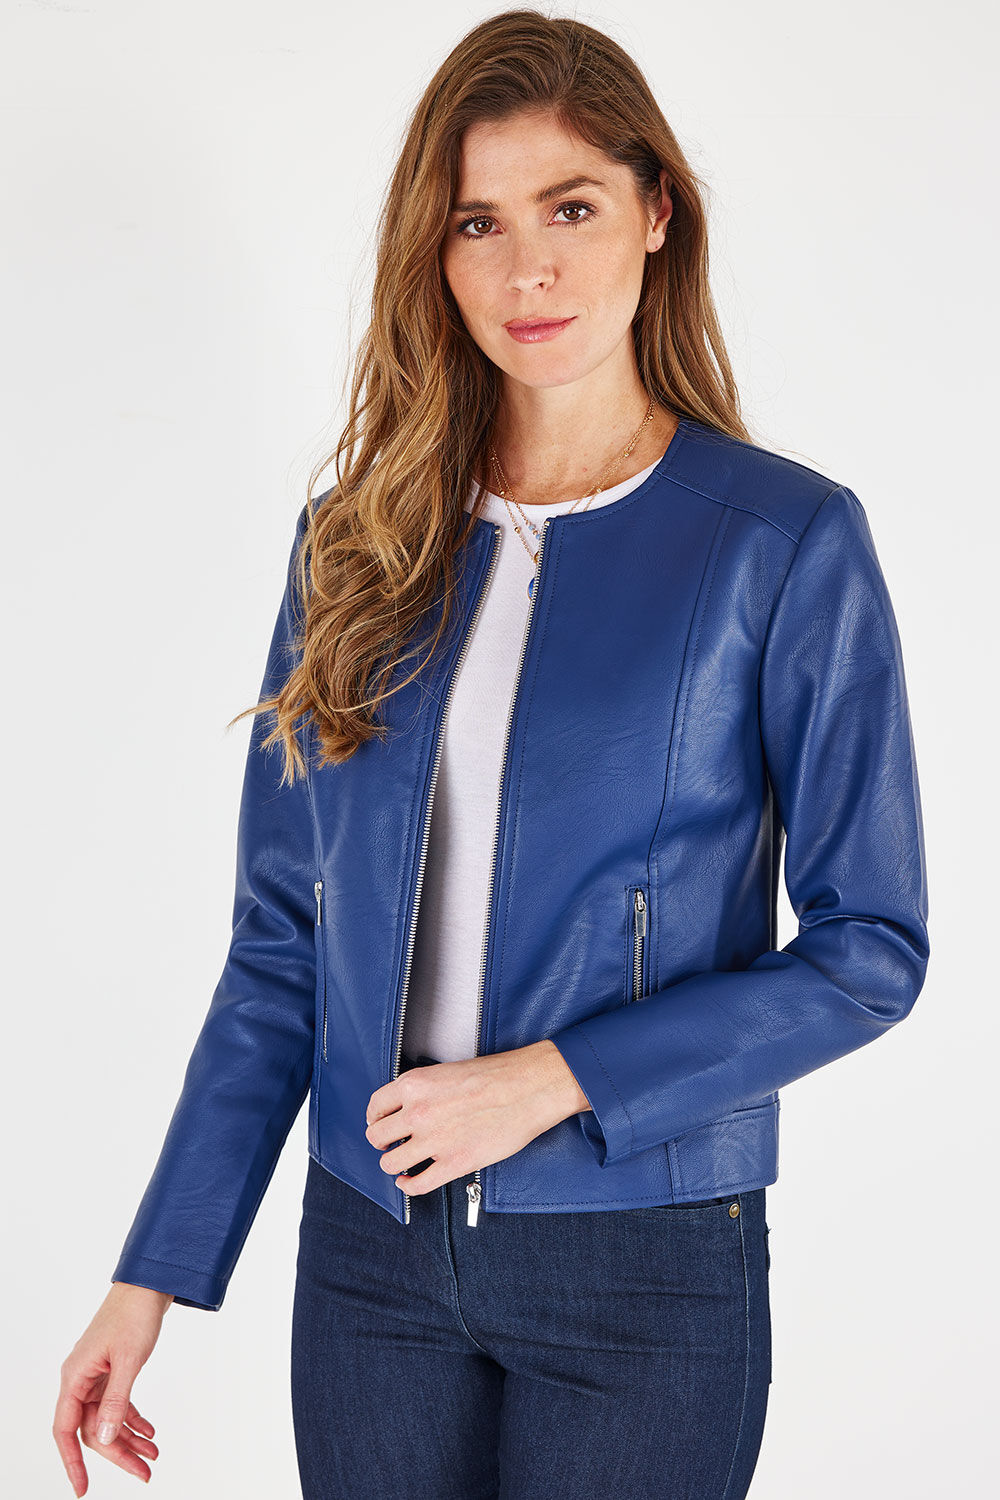 Bonmarche Navy Faux Leather Collarless Jacket, Size: 18